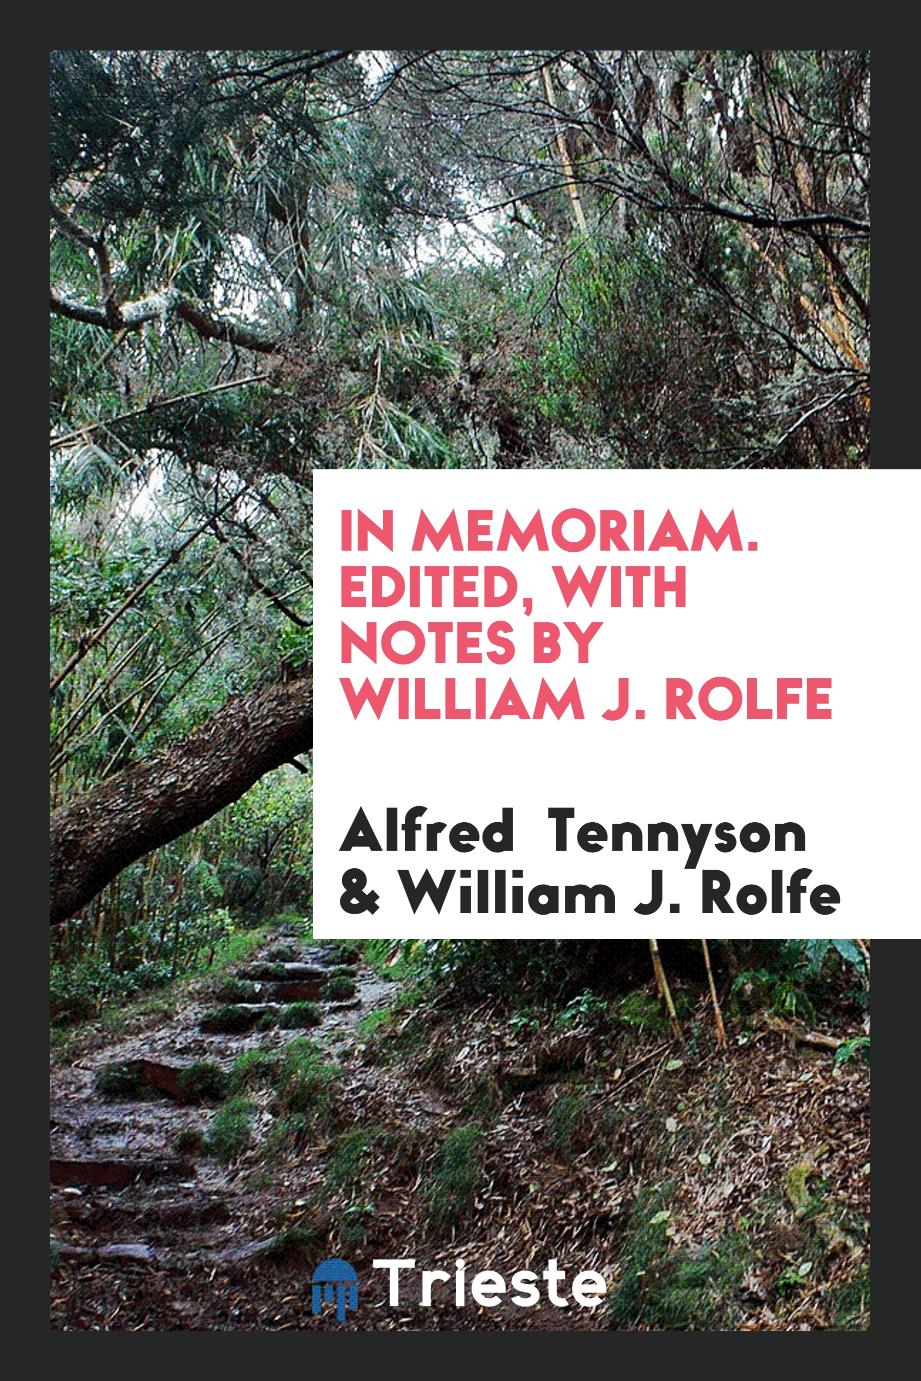 In Memoriam. Edited, with Notes by William J. Rolfe